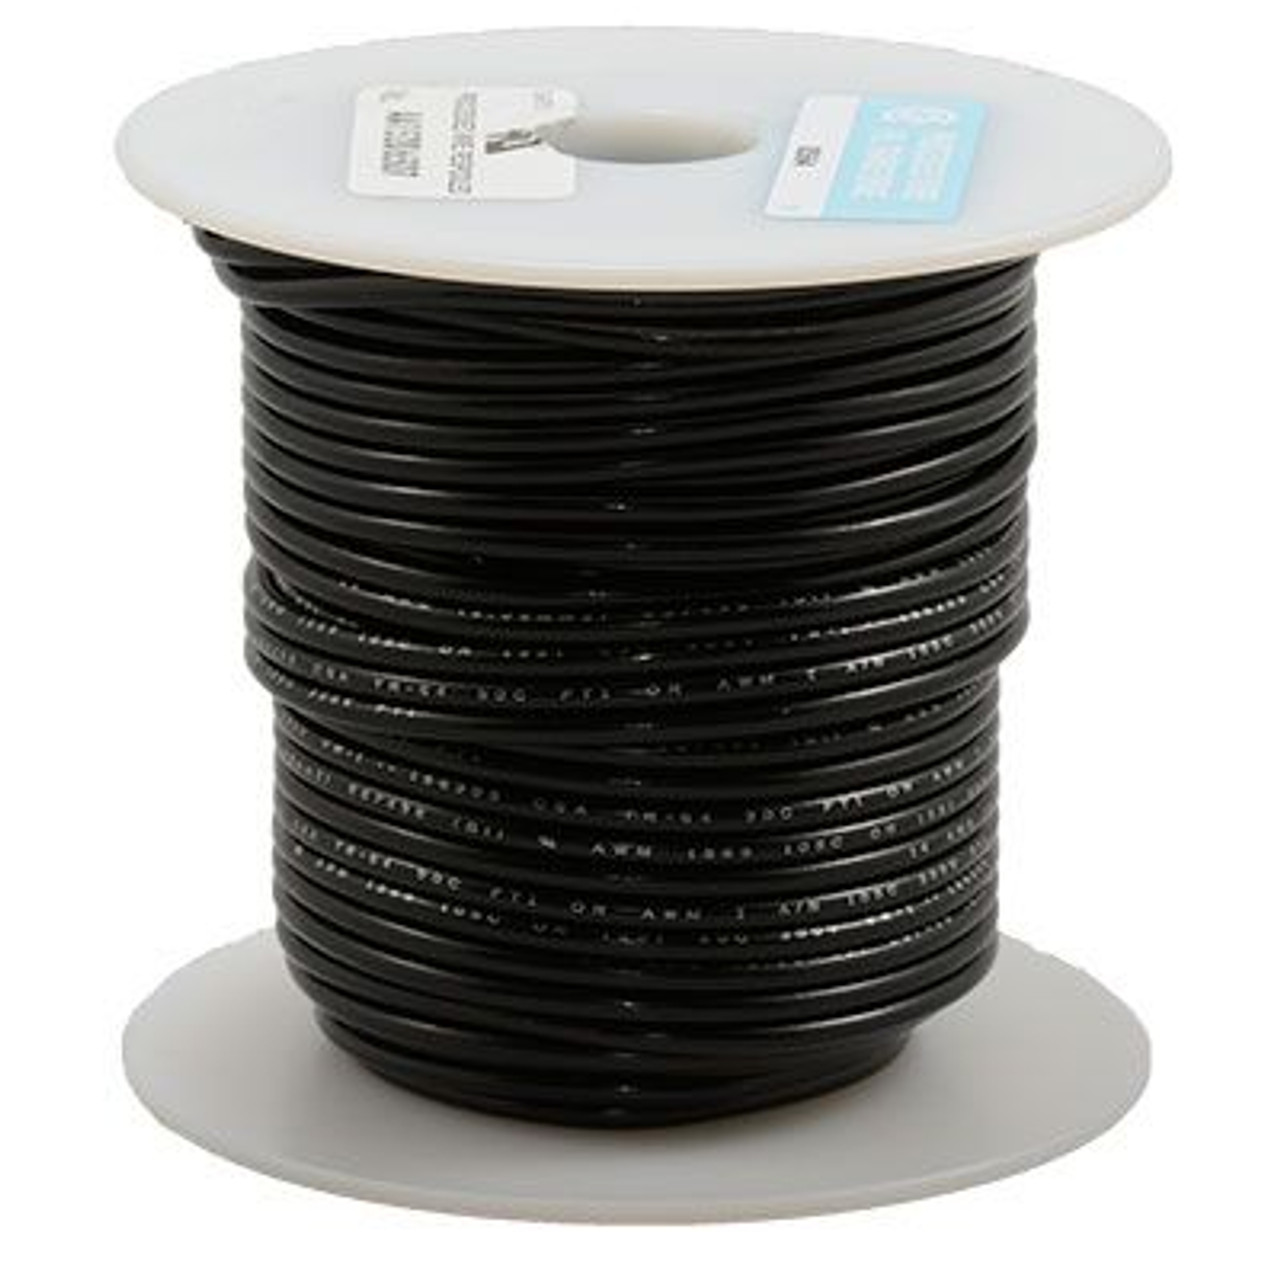 https://cdn11.bigcommerce.com/s-nnahwwwhci/images/stencil/1280x1280/products/15942/18383/black-25-foot-14-awg-stranded-hook-up-wire-5__18068.1663599406.jpg?c=1